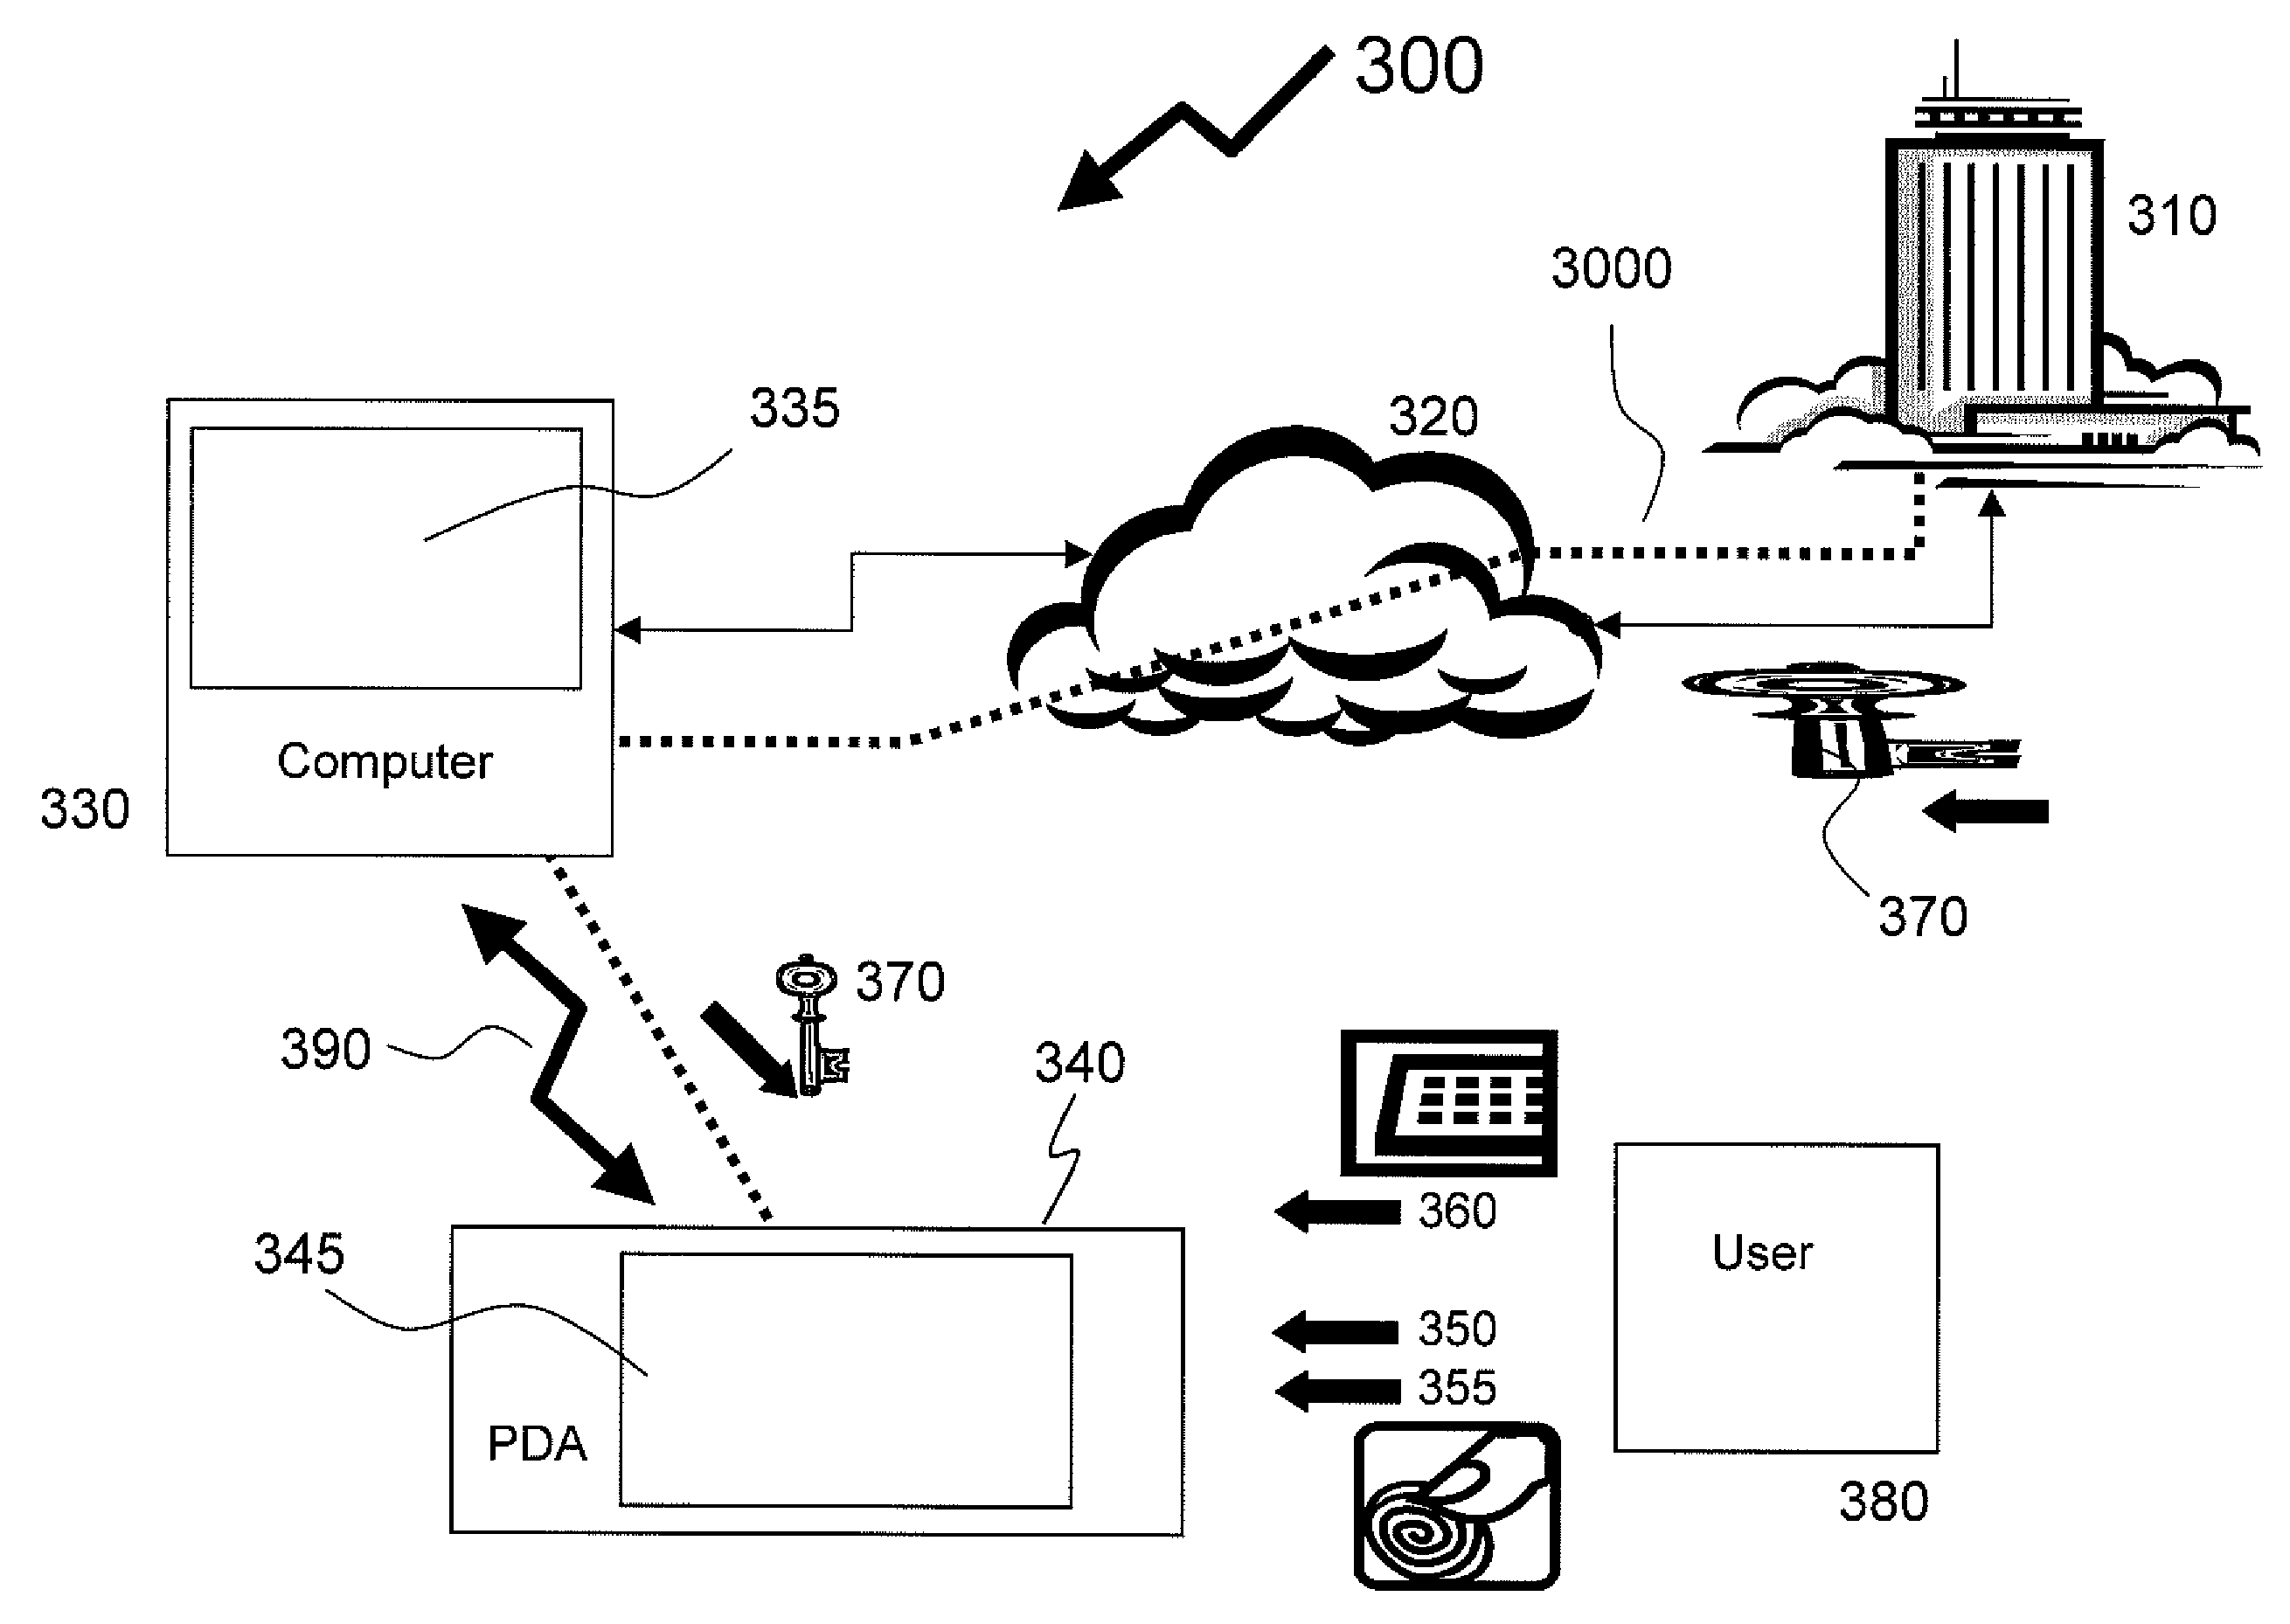 Method of Providing Assured Transactions by Watermarked File Display Verification